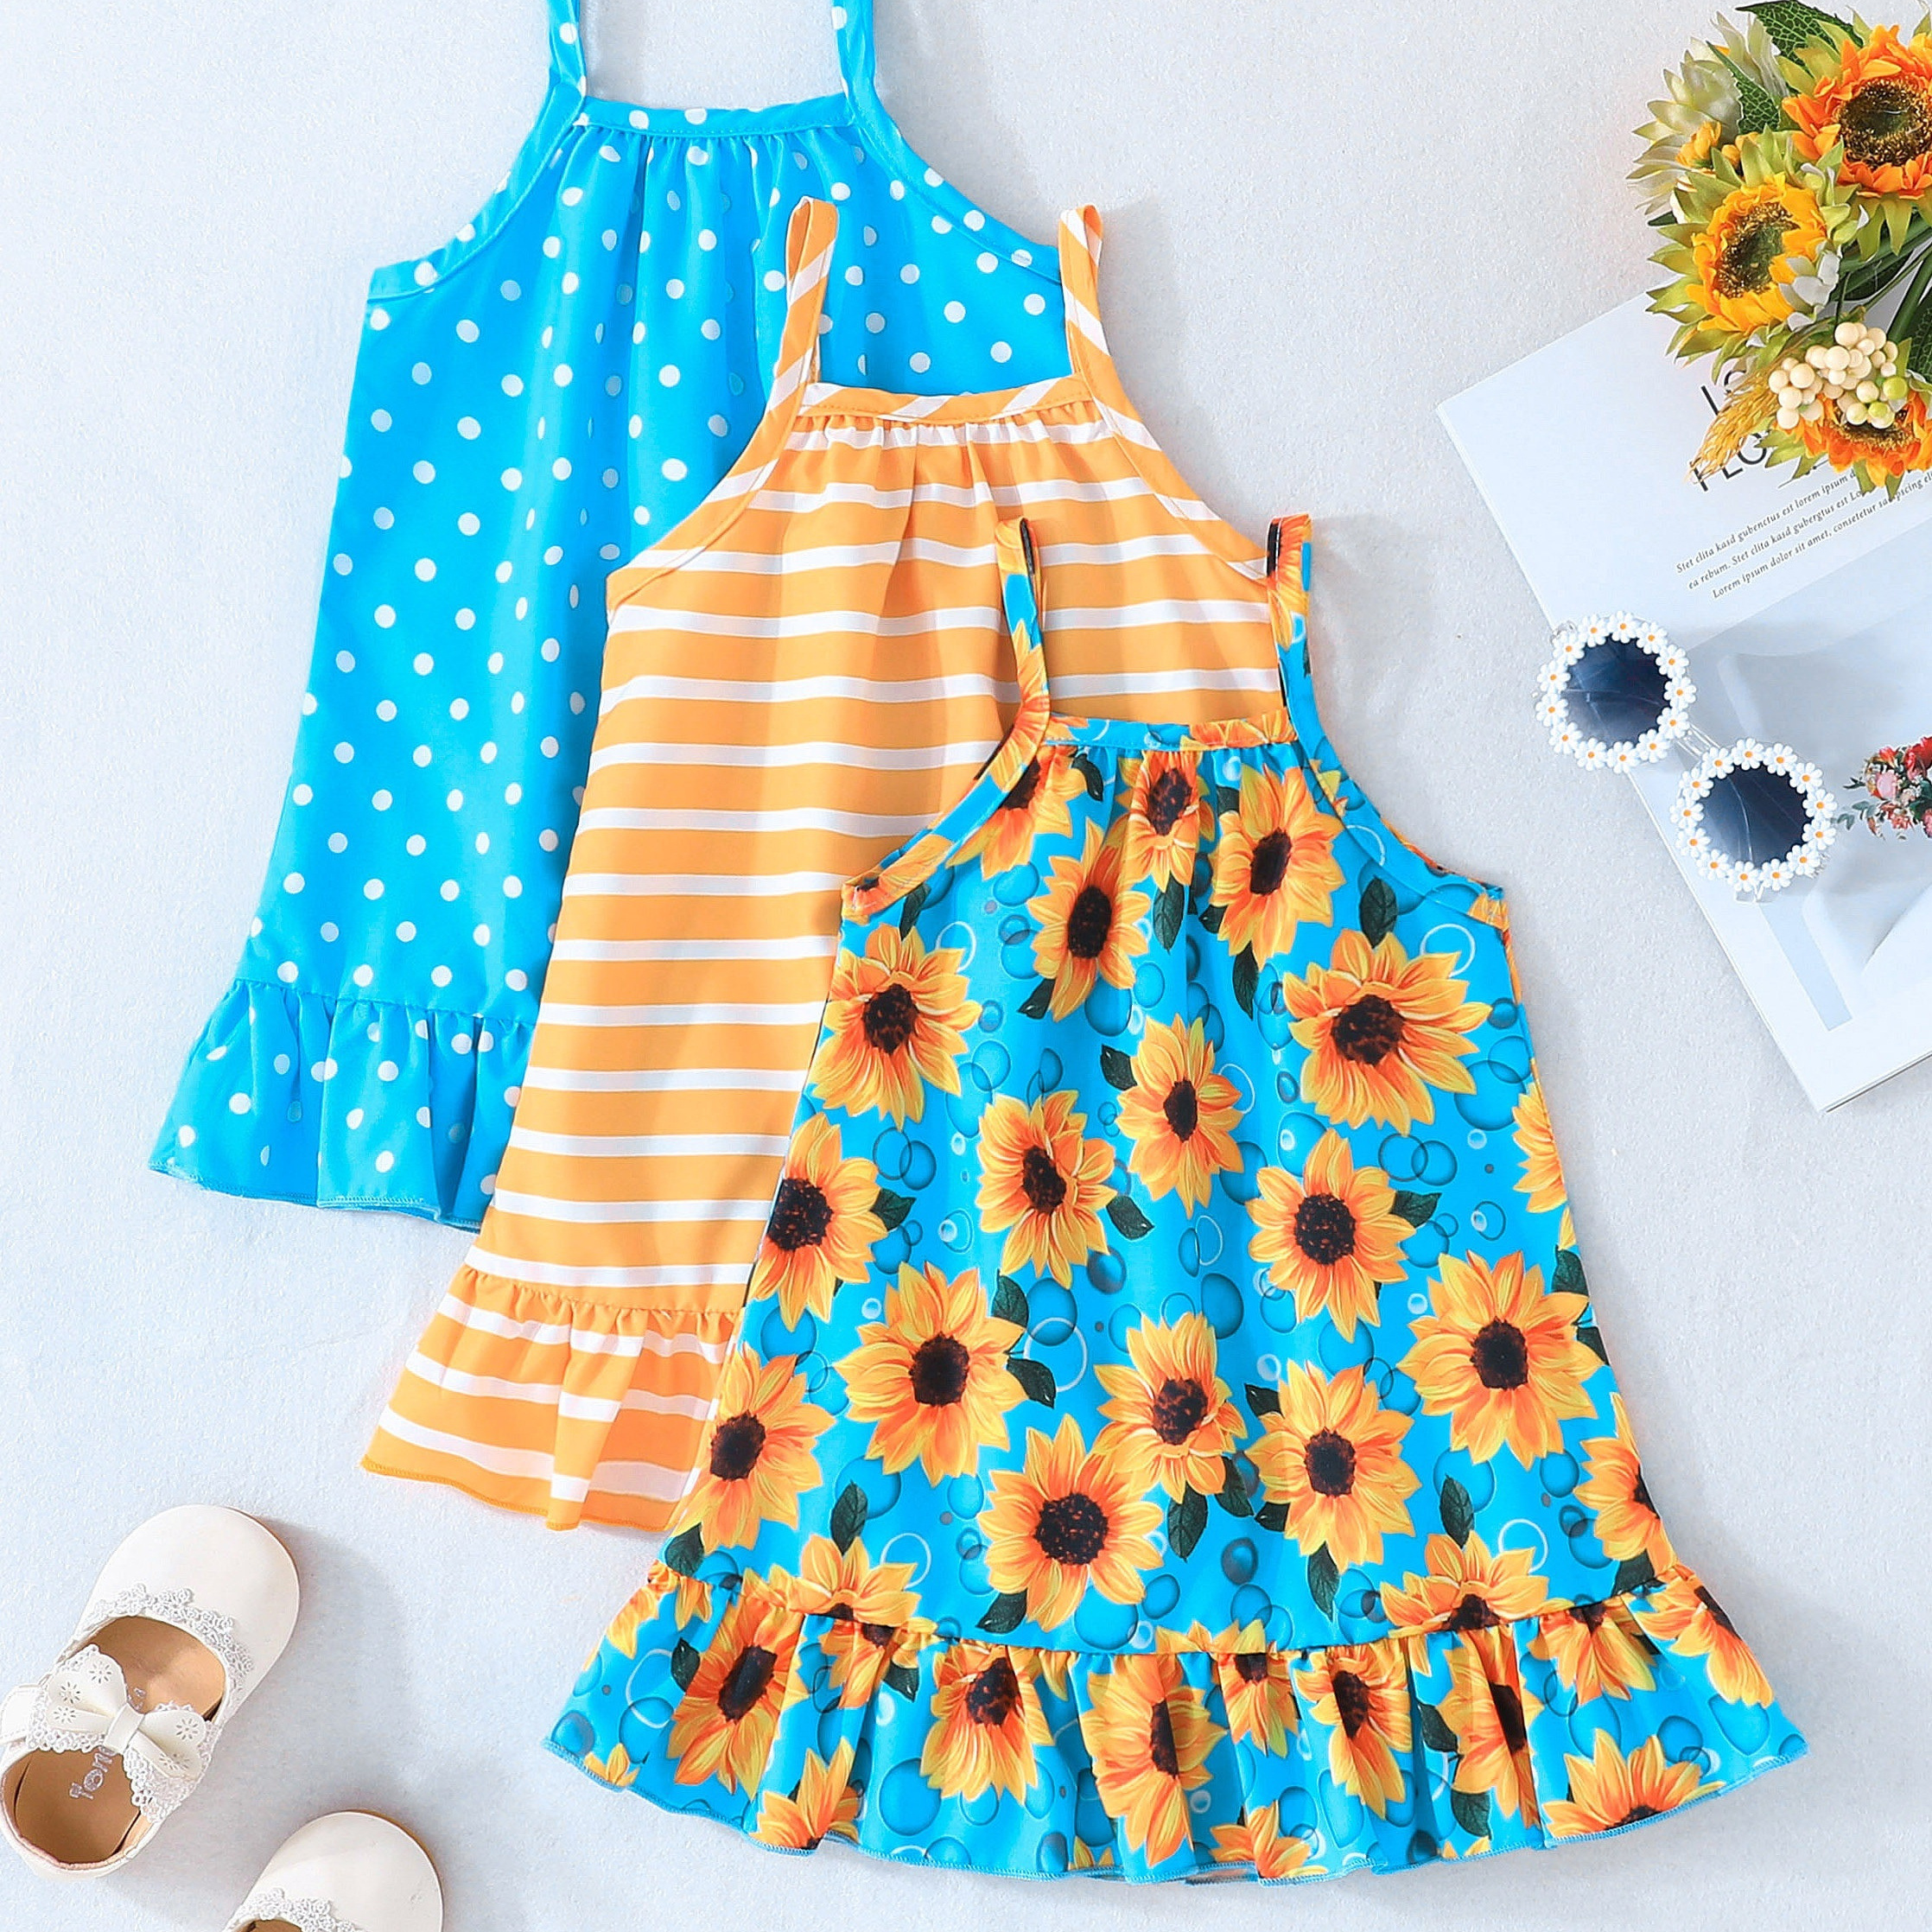 

3pcs Baby's Casual Ruffle Trim Cami Dress, Polka Dots & Stripe & Sunflower Pattern Sleeveless Dress, Infant & Toddler Girl's Clothing For Summer Beach Holiday, As Gift